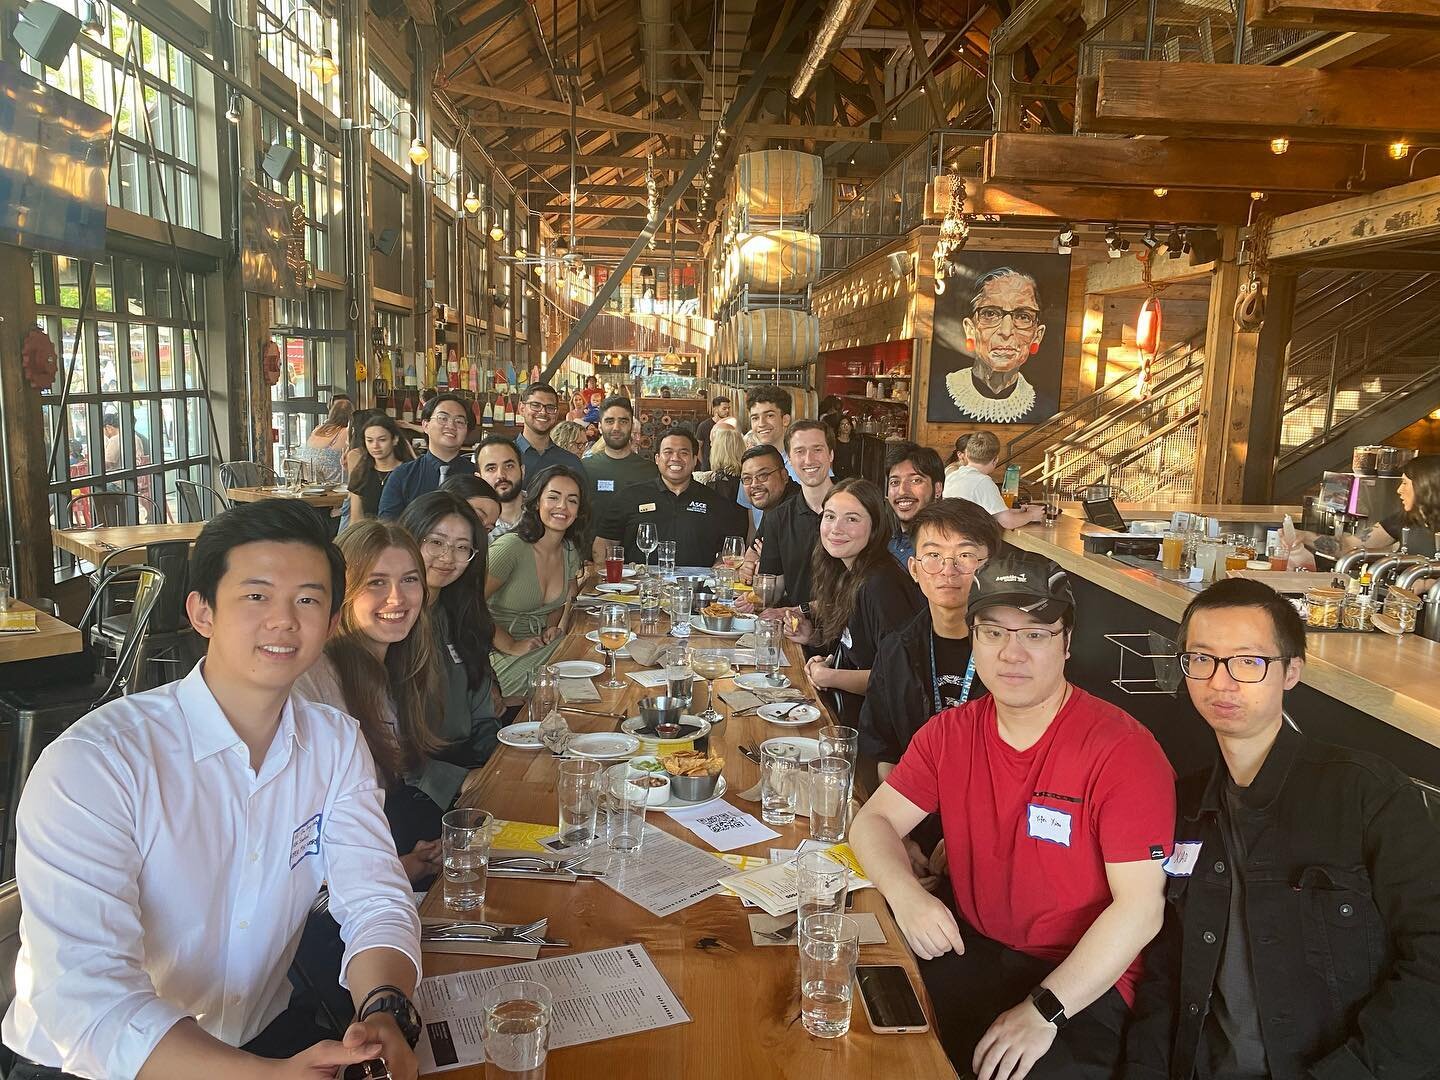 Great turn up at our joint networking event with Seattle YMF. 😁